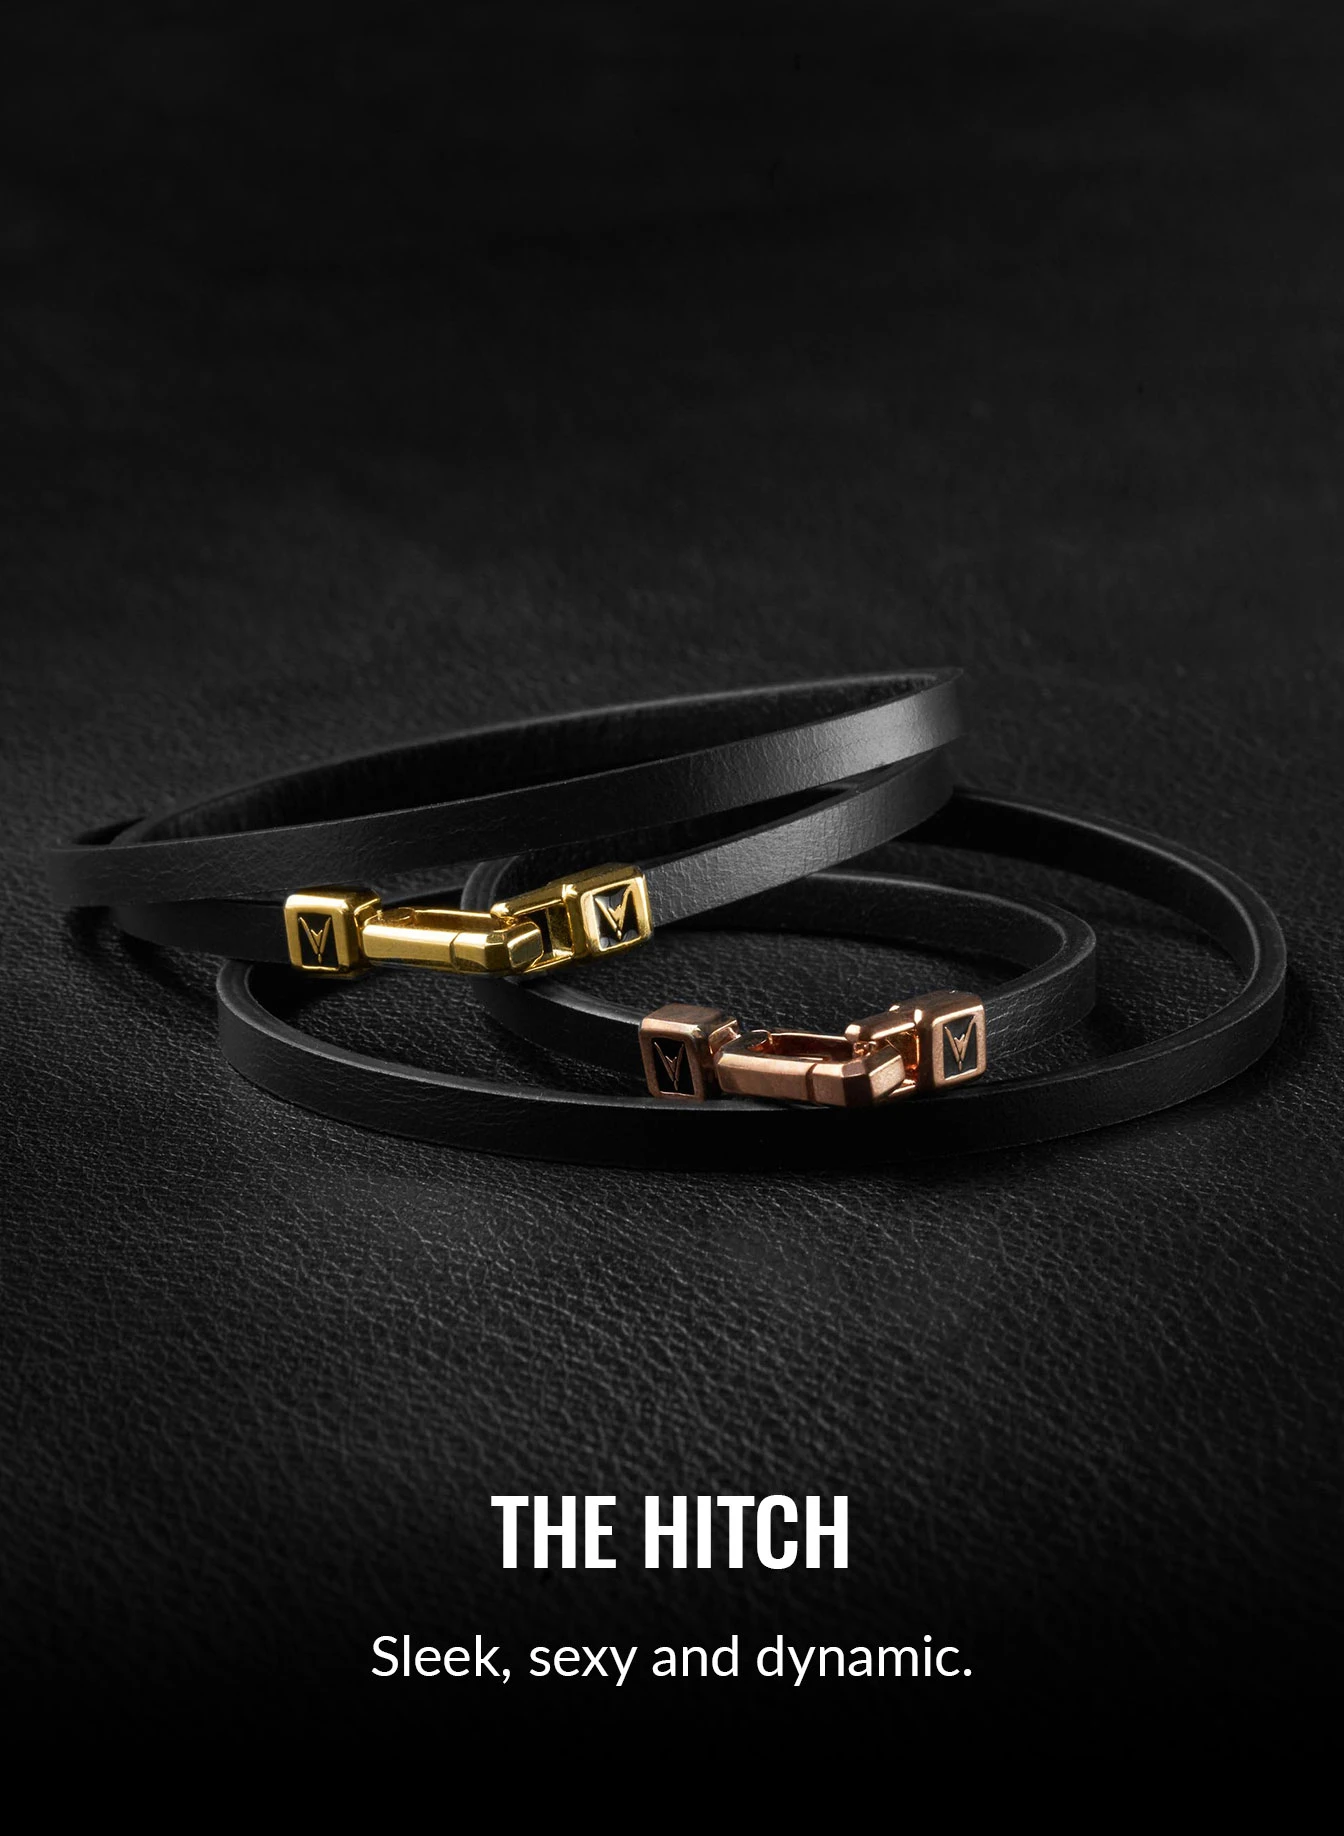 THE HITCH